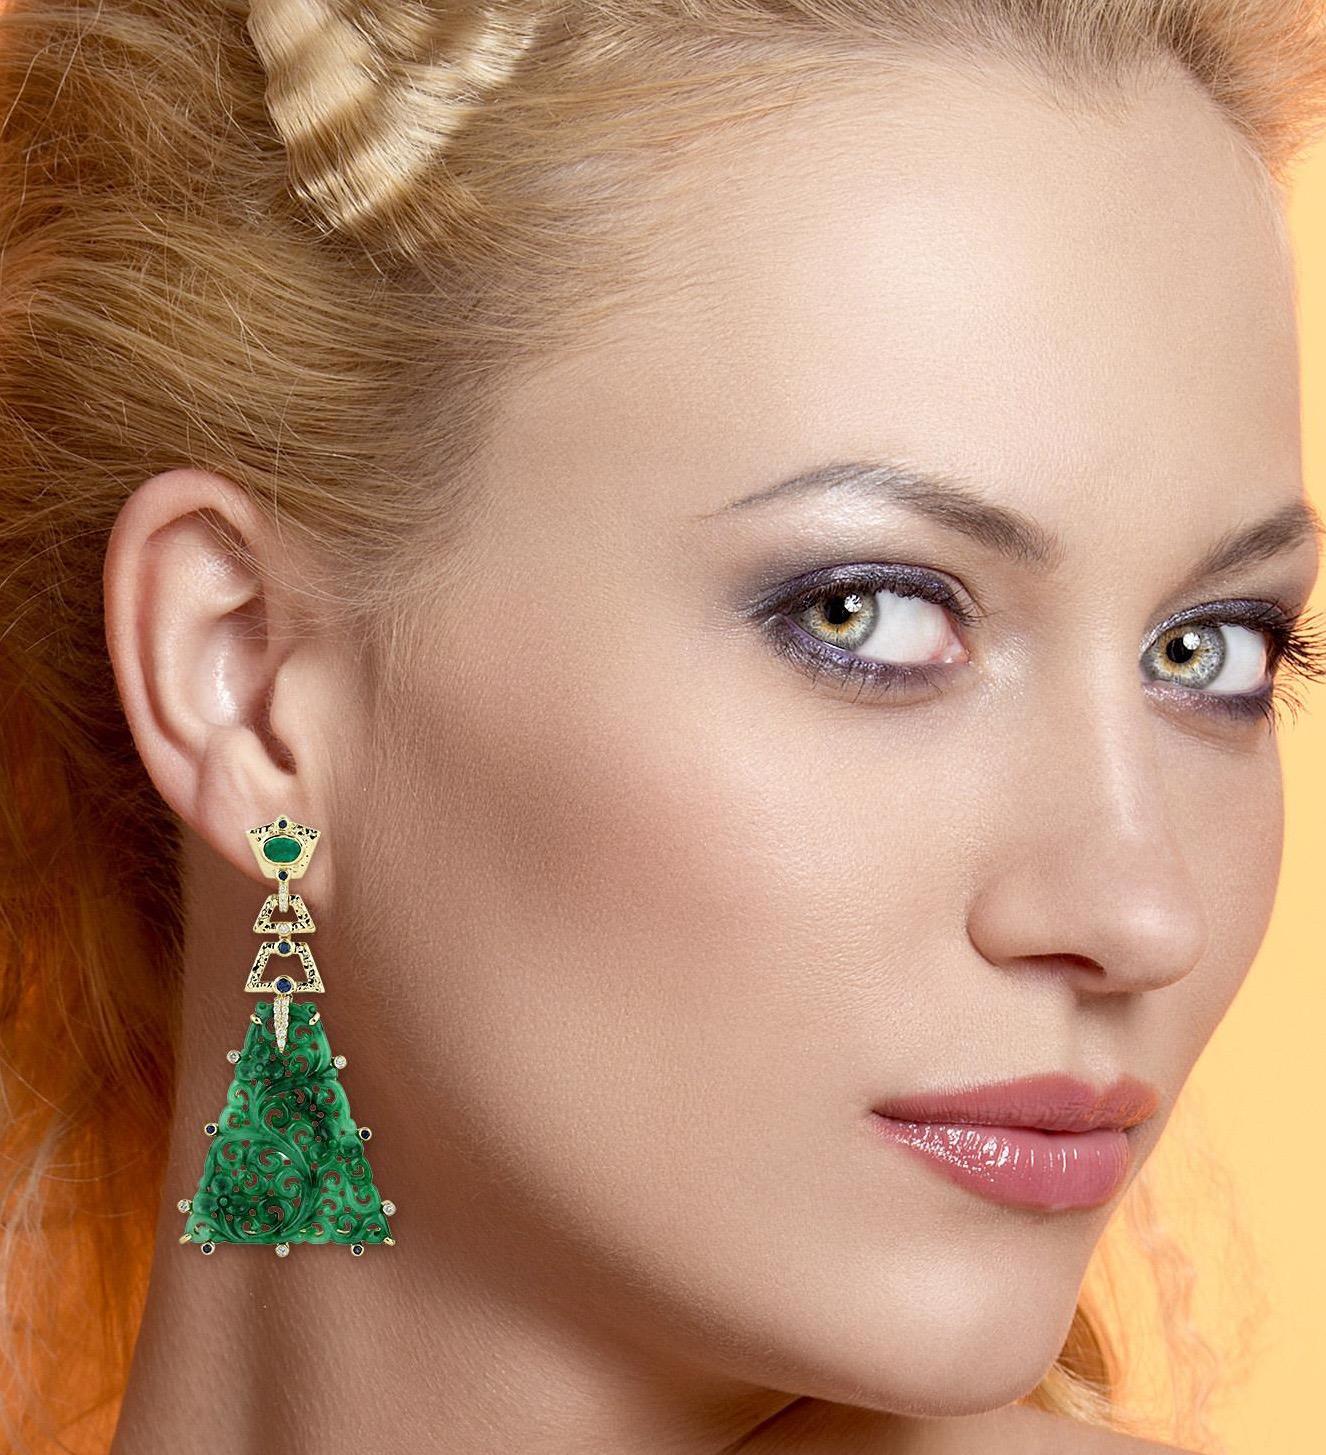 Handcrafted from 18-karat gold, these stunning earrings are set with 32.92 carats of carved Jade, 0.90 carats emerald, .53 carats sapphire and .38 carats sparkling diamonds.

FOLLOW  MEGHNA JEWELS storefront to view the latest collection & exclusive